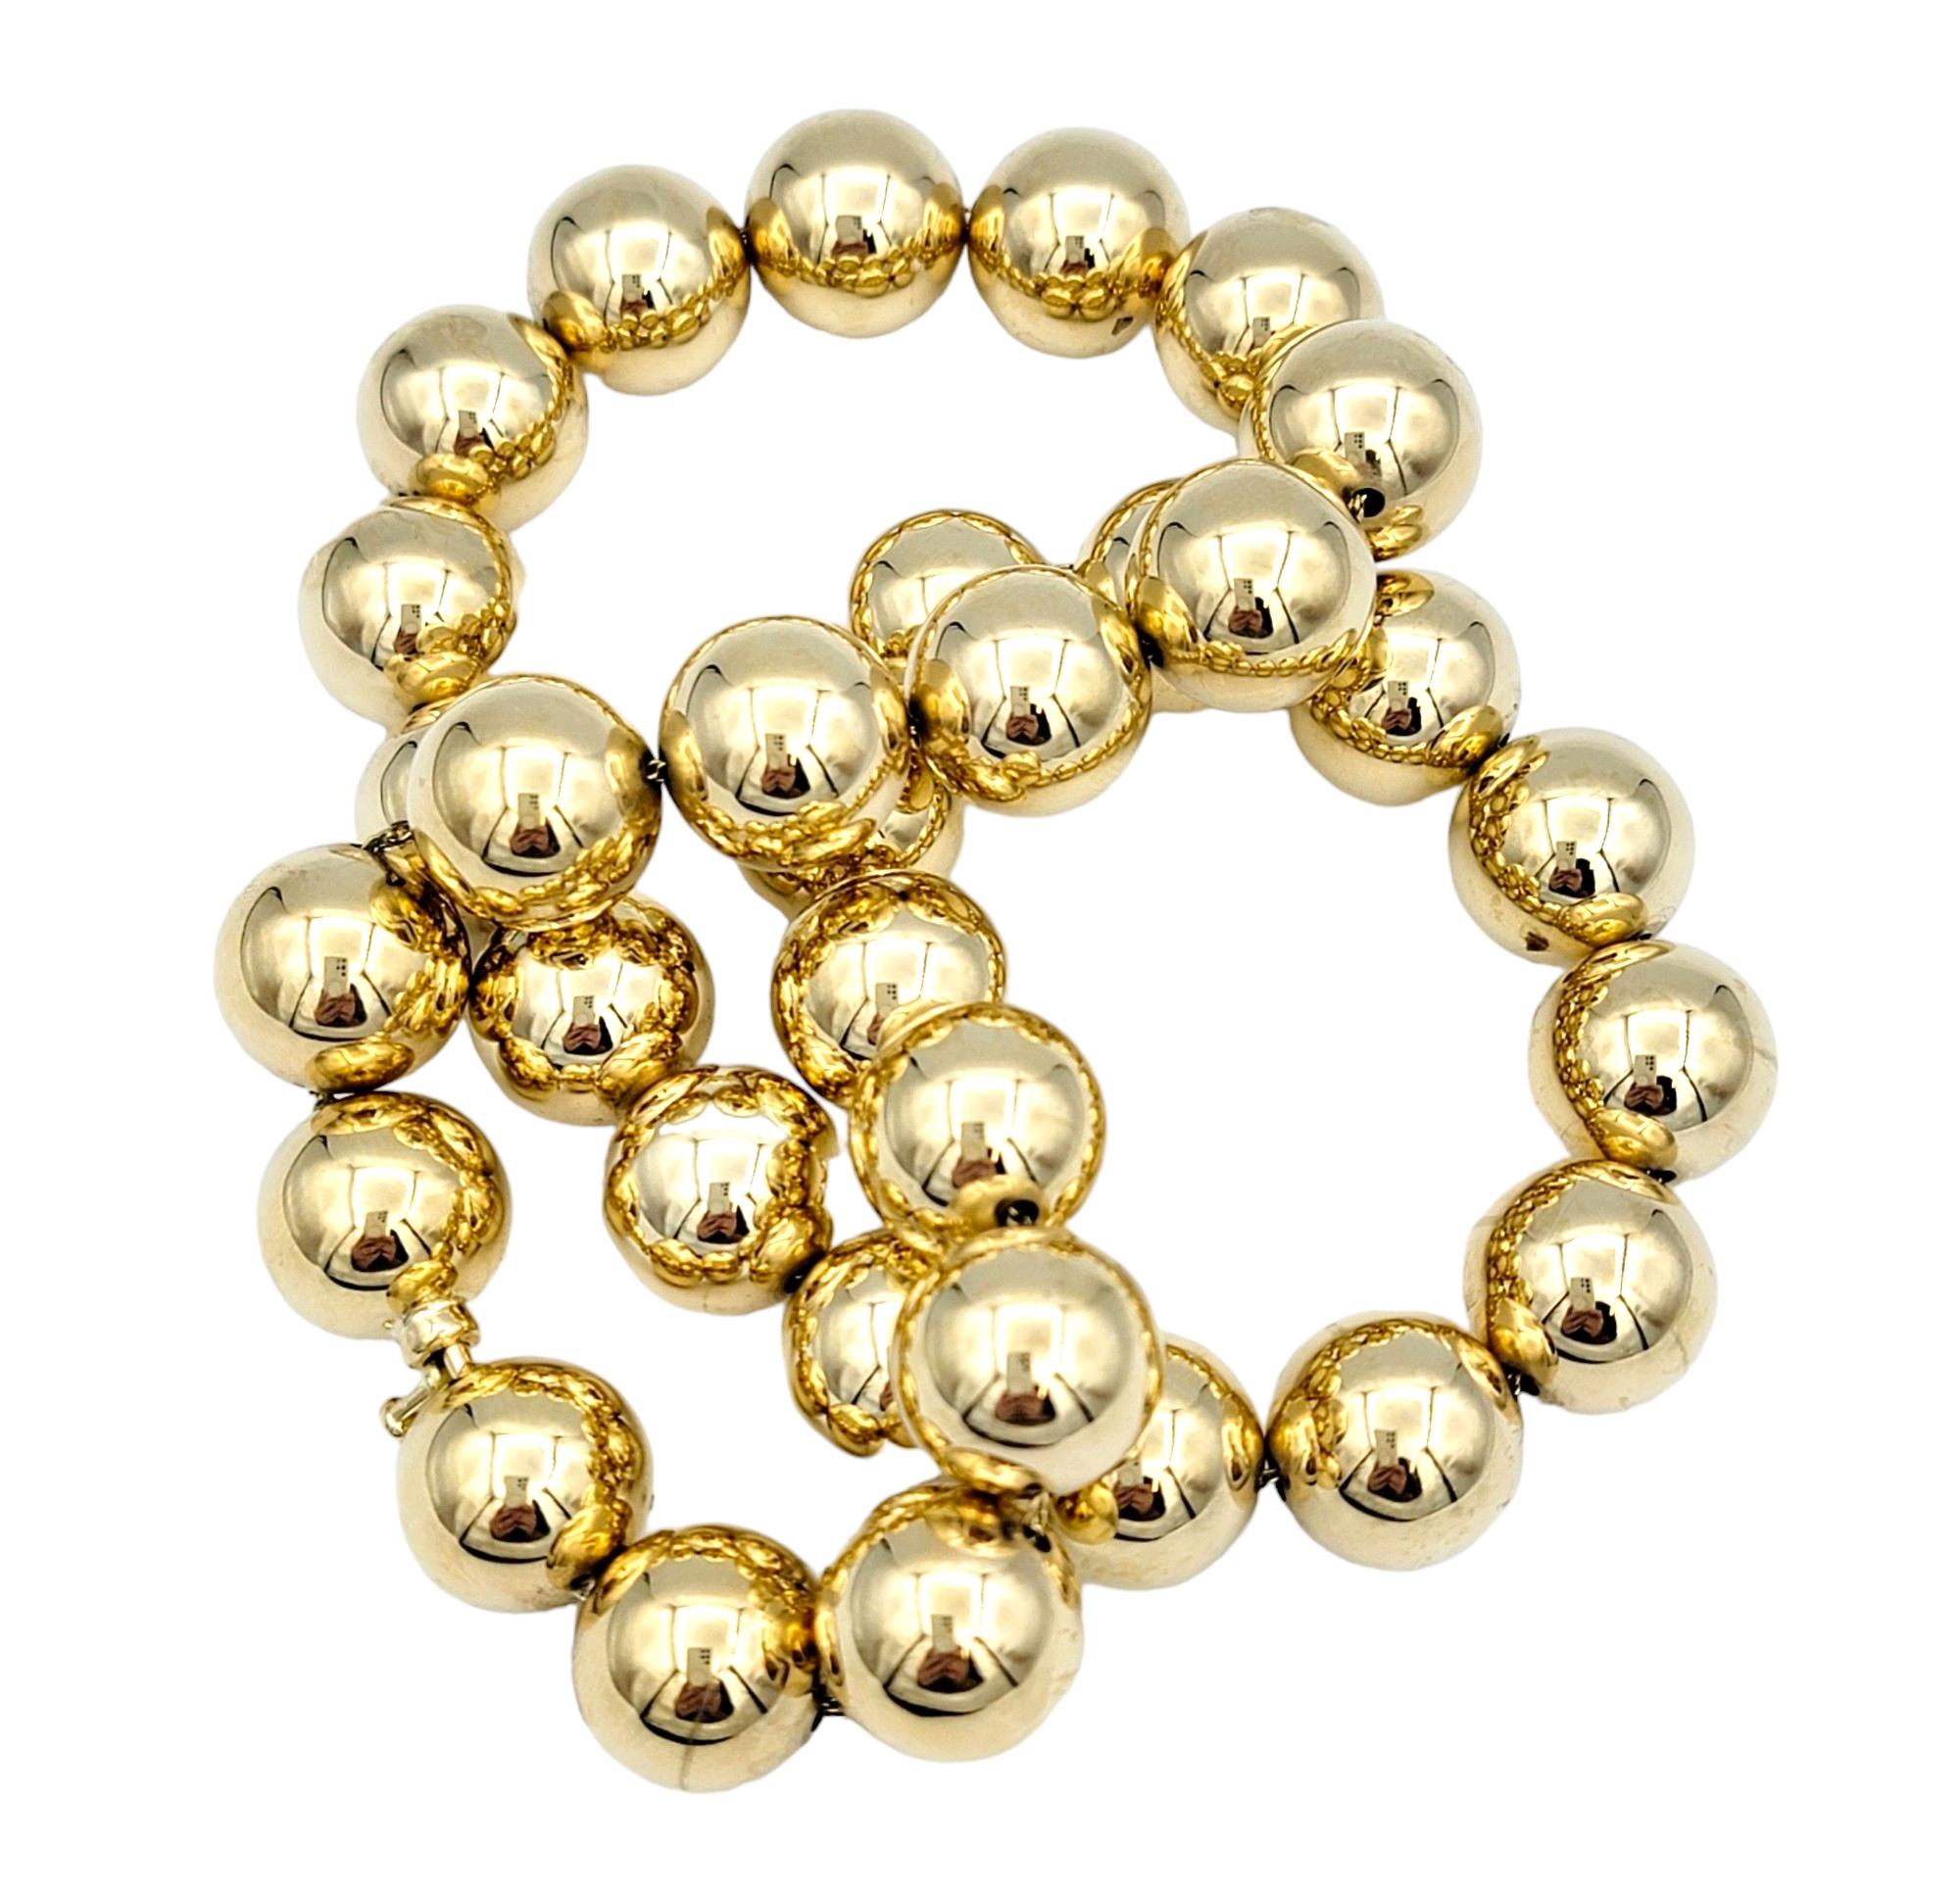  14 Karat Yellow Gold Polished Gold Ball Beaded Choker Necklace In Good Condition For Sale In Scottsdale, AZ